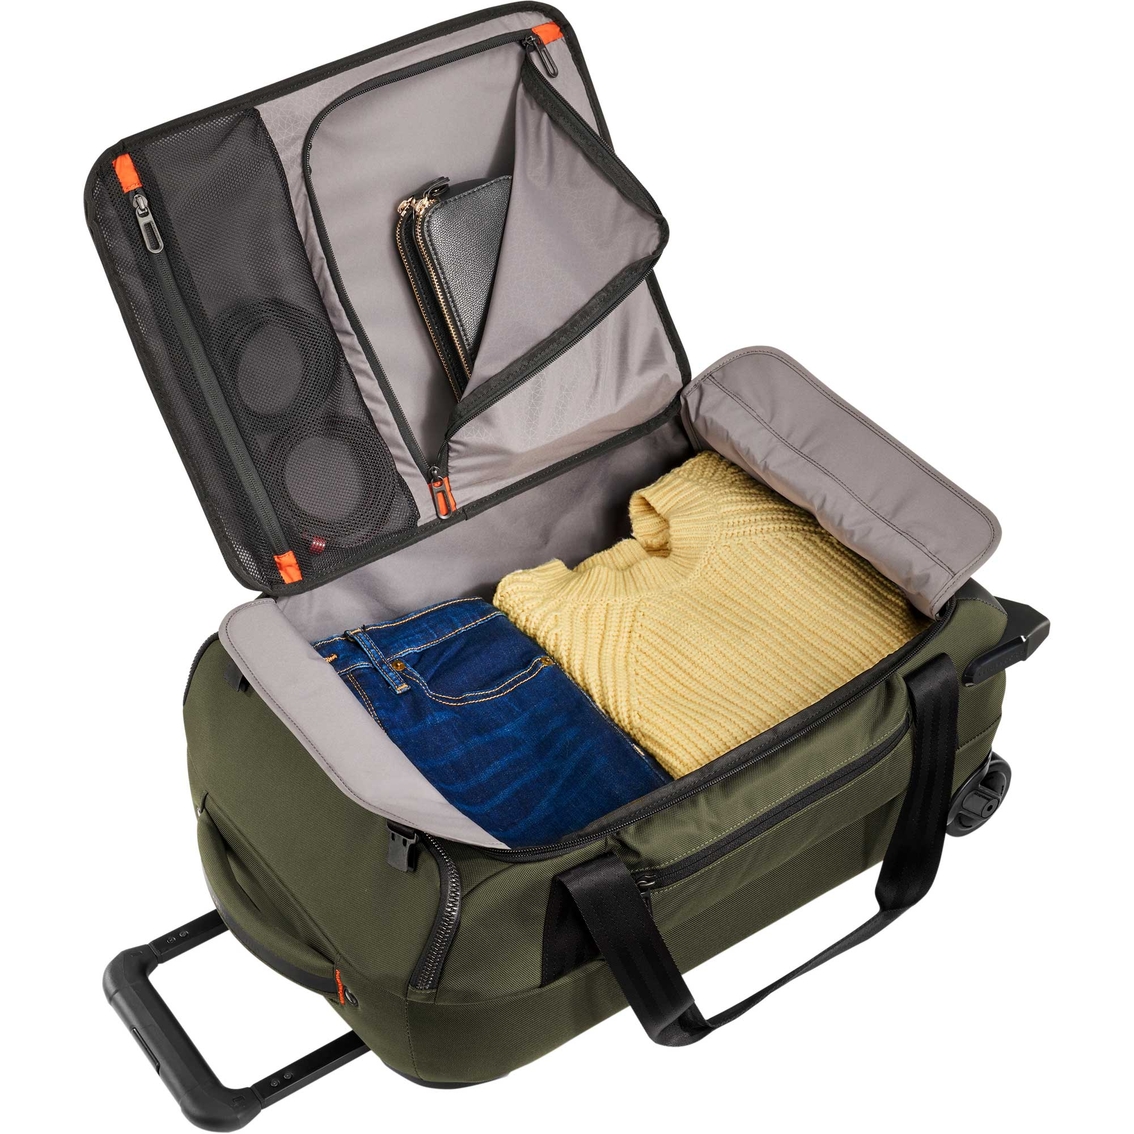 Briggs & Riley ZDX 21 in. Carry On Wheeled Duffel - Image 7 of 10